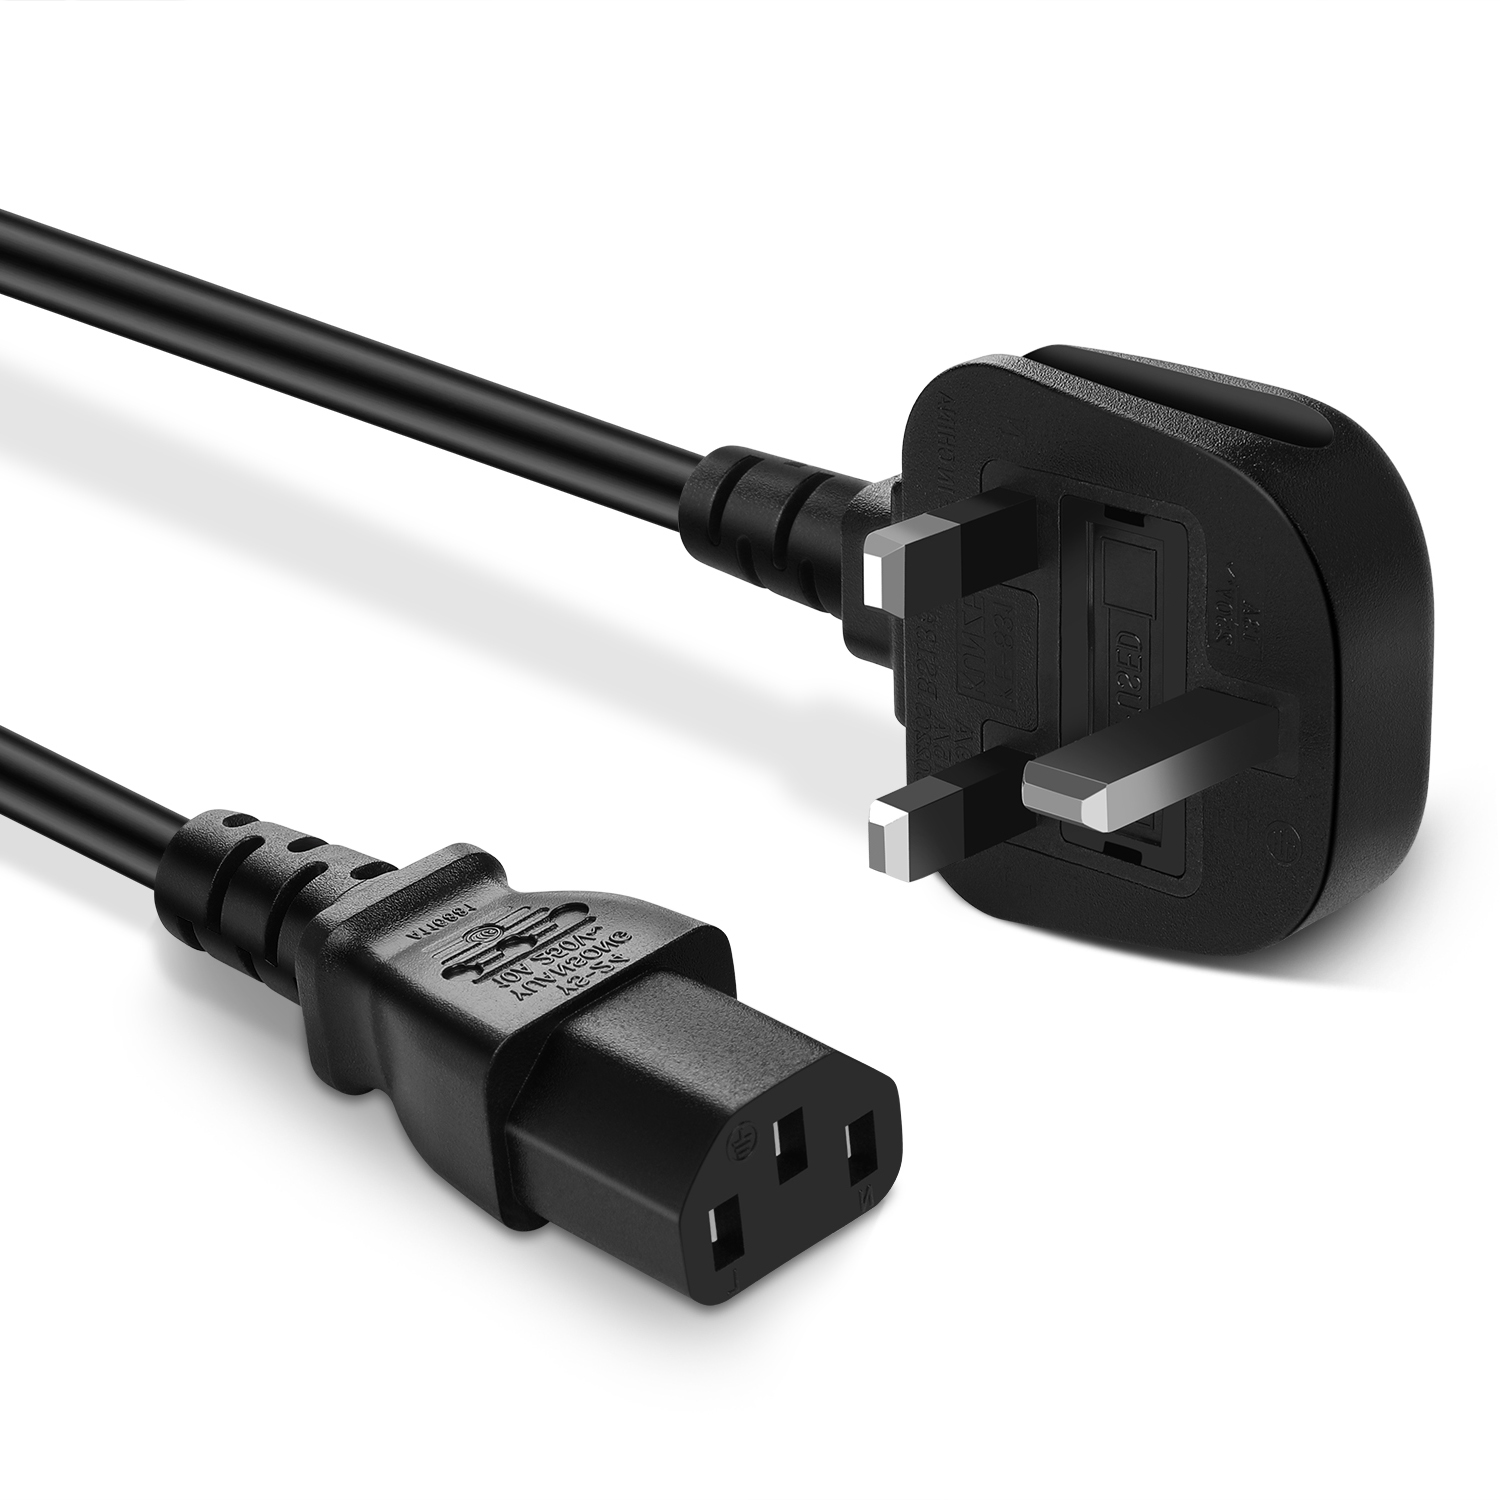 Replacement power cord for most models of a desktop PC computer, scanner, printer, LED TV, computer monitor, projector, powered speakers, laser printer, Sony PlayStation 3 PS3 and more that have a removable power cord and use the 3-pin shroud power connector